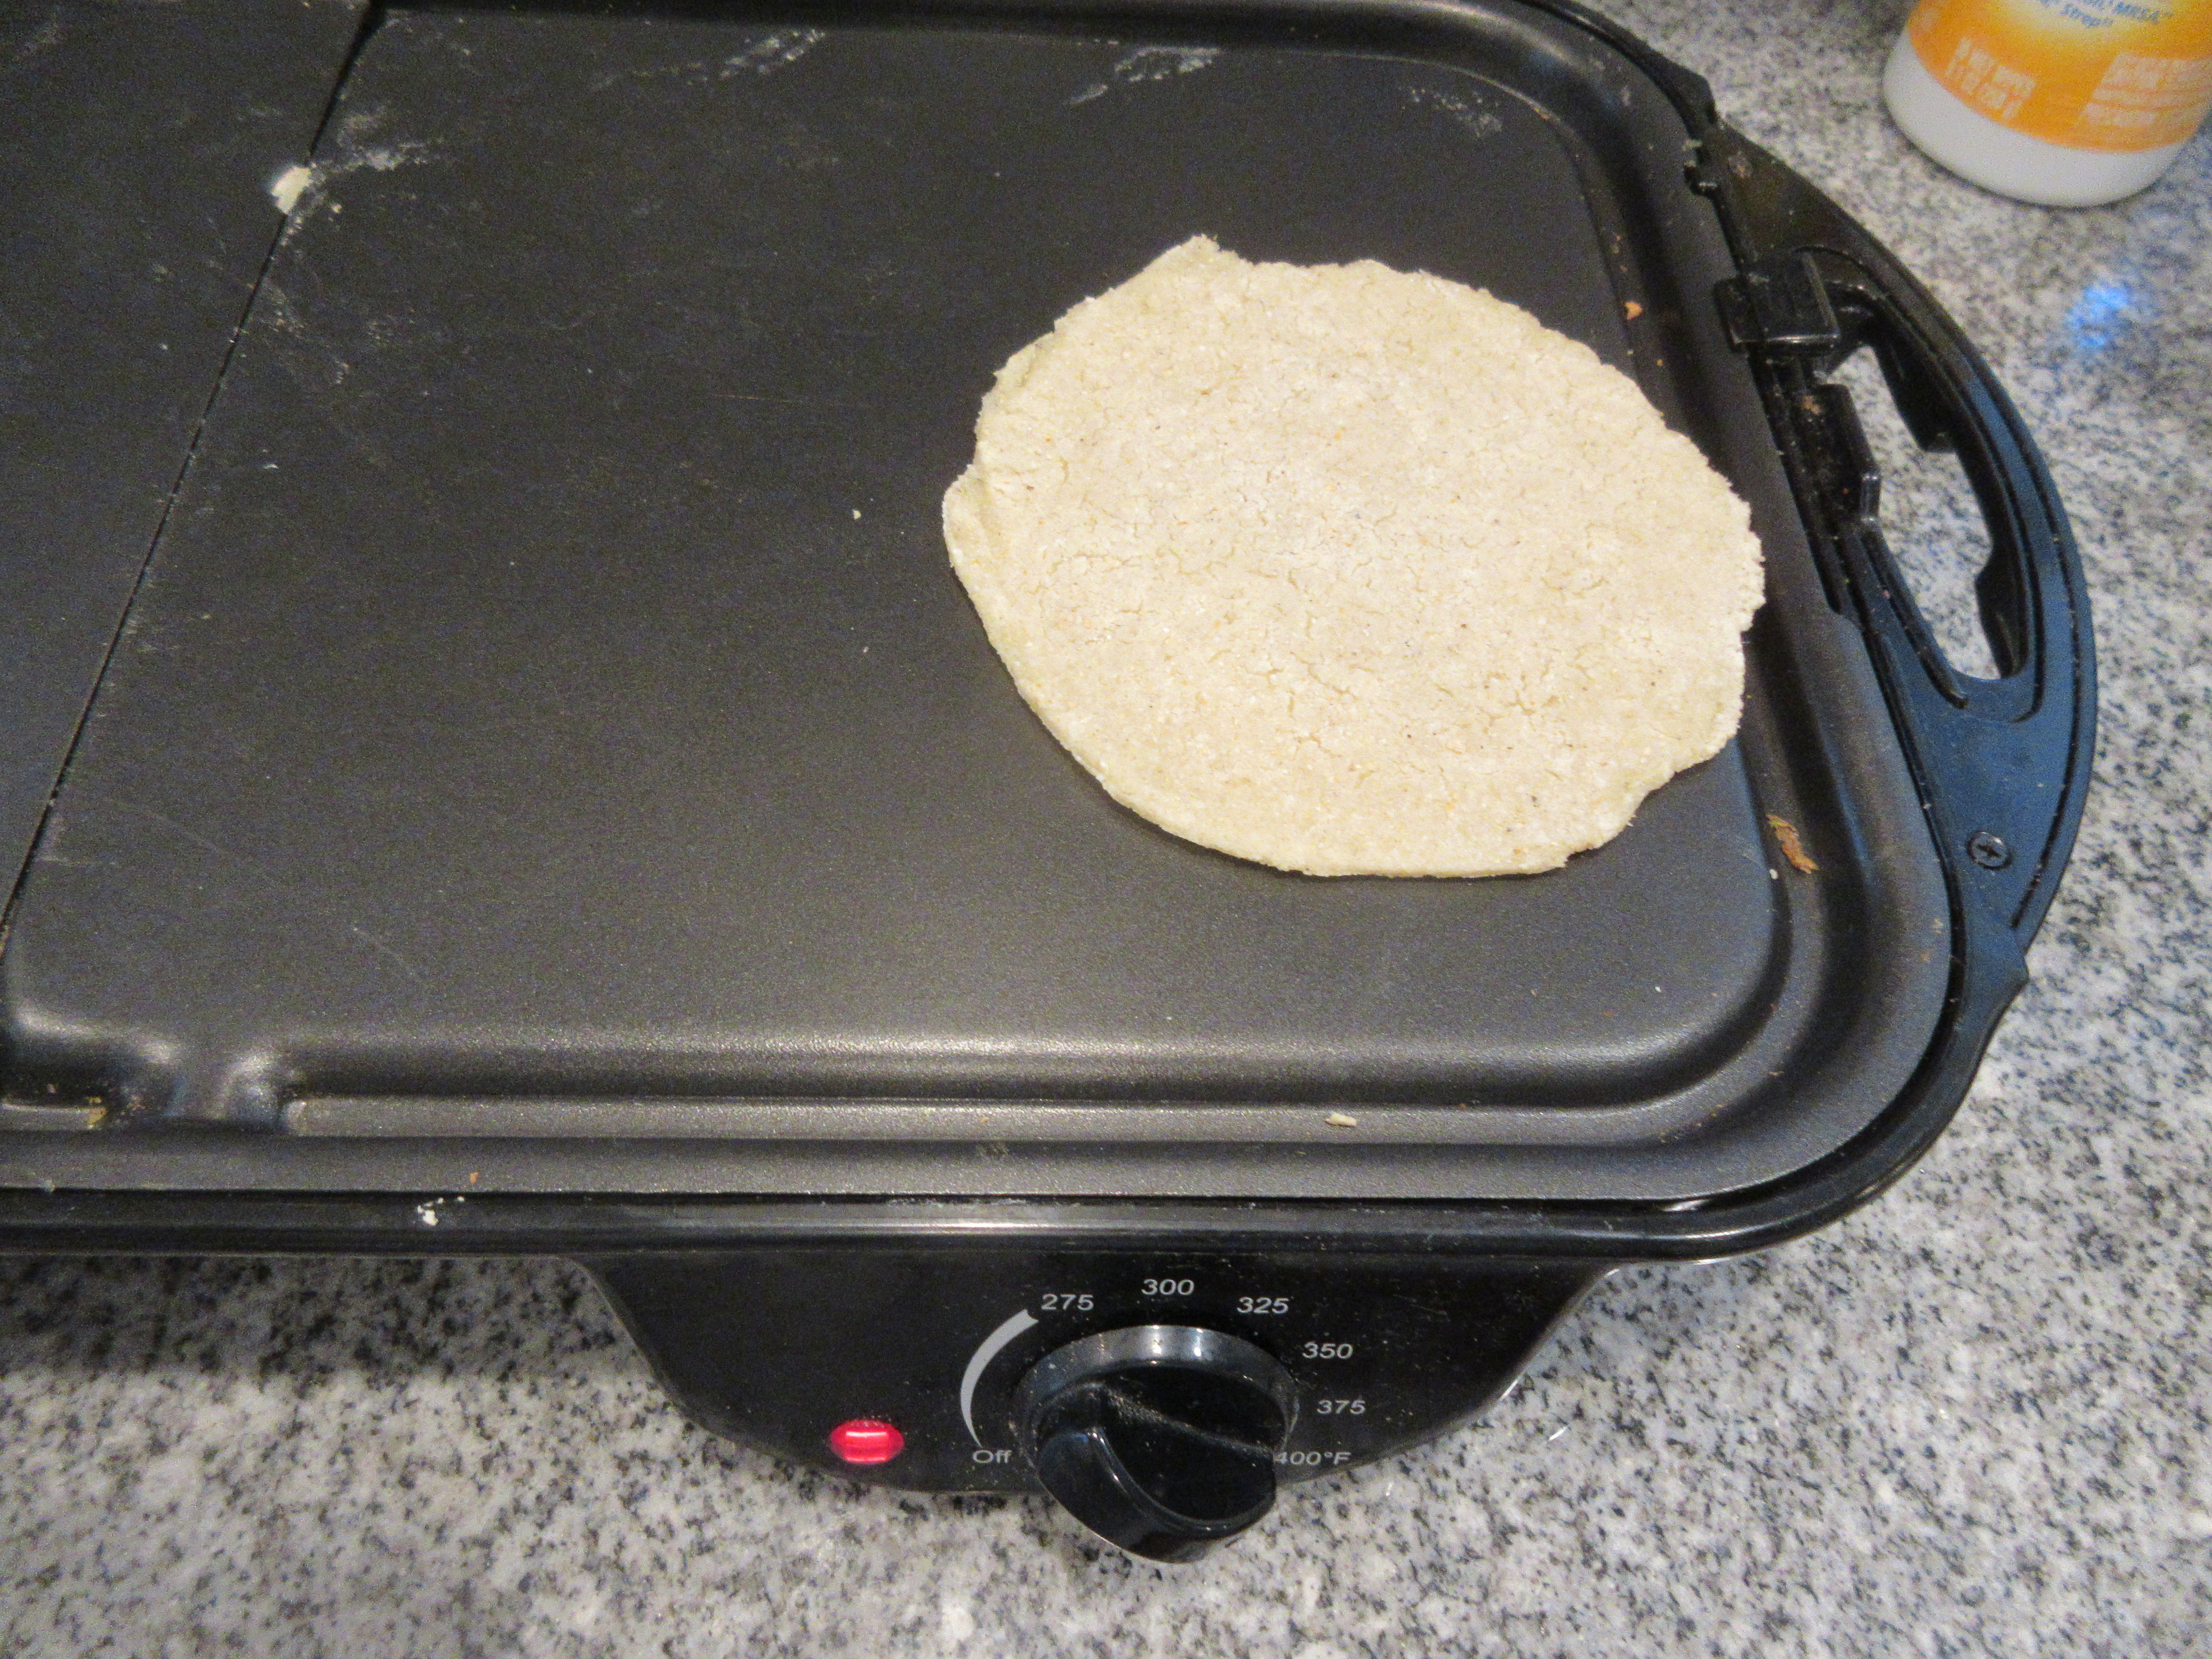 File:Tortilla cooking on an electric griddle 02.jpg - Wikimedia Commons